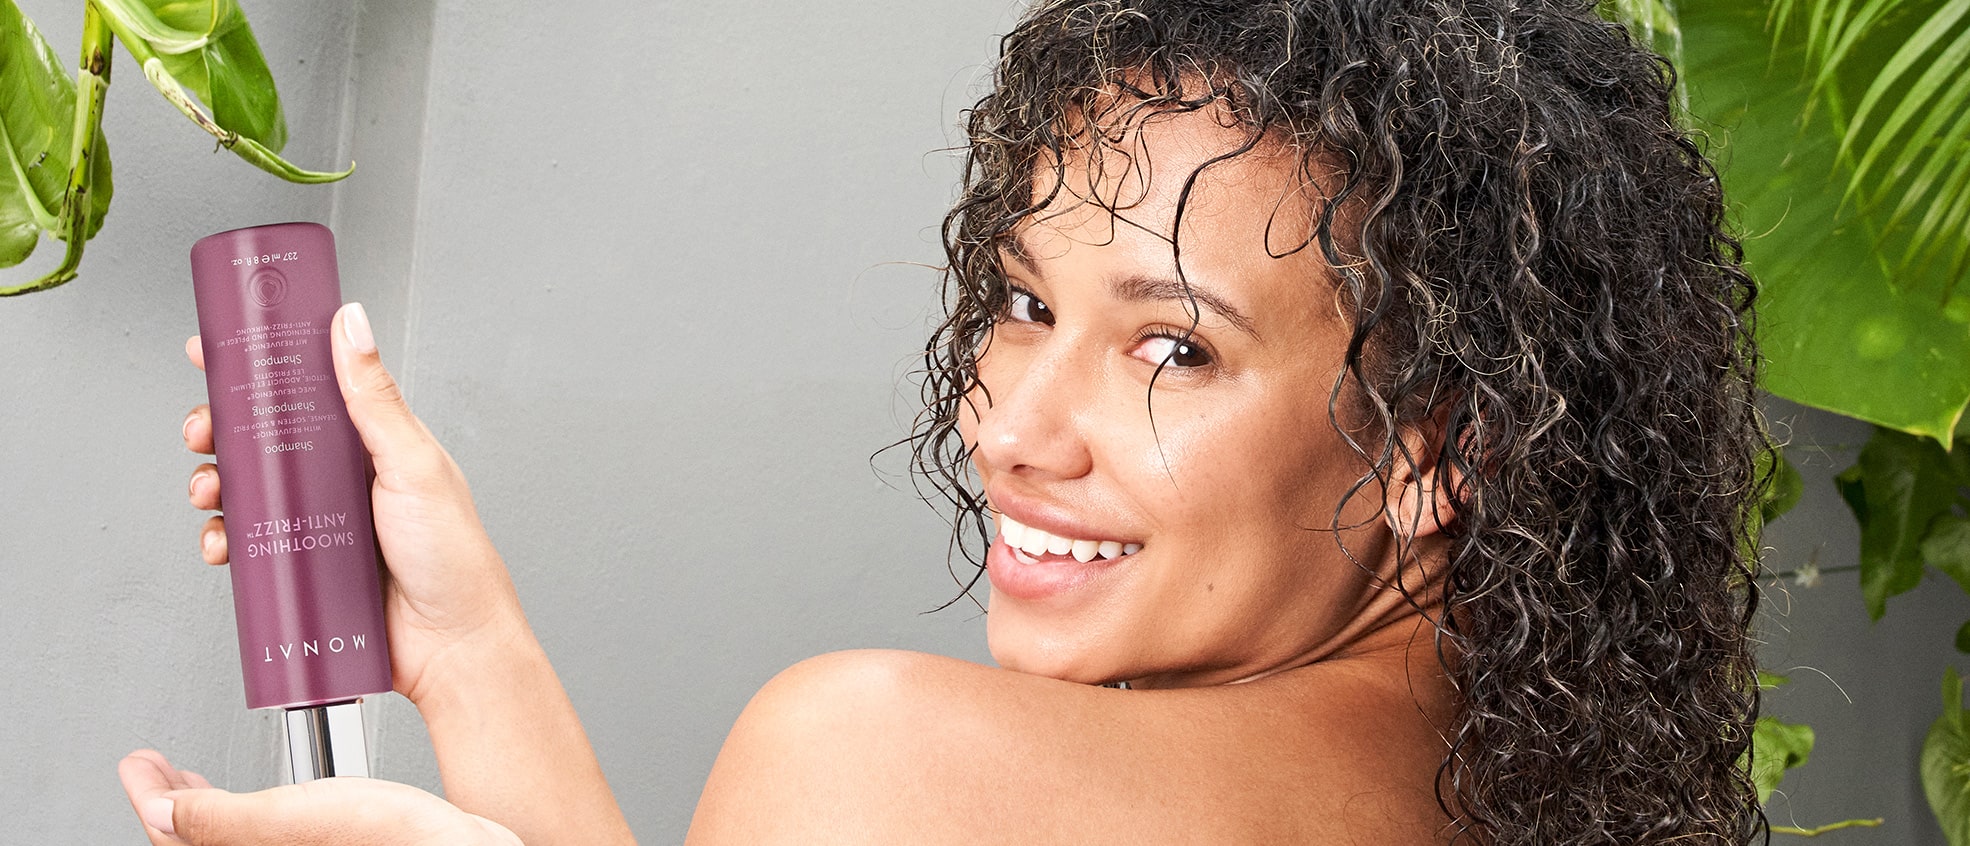 A brunette woman with curly hair holding Smoothing Anti-Frizz™ Shampoo.